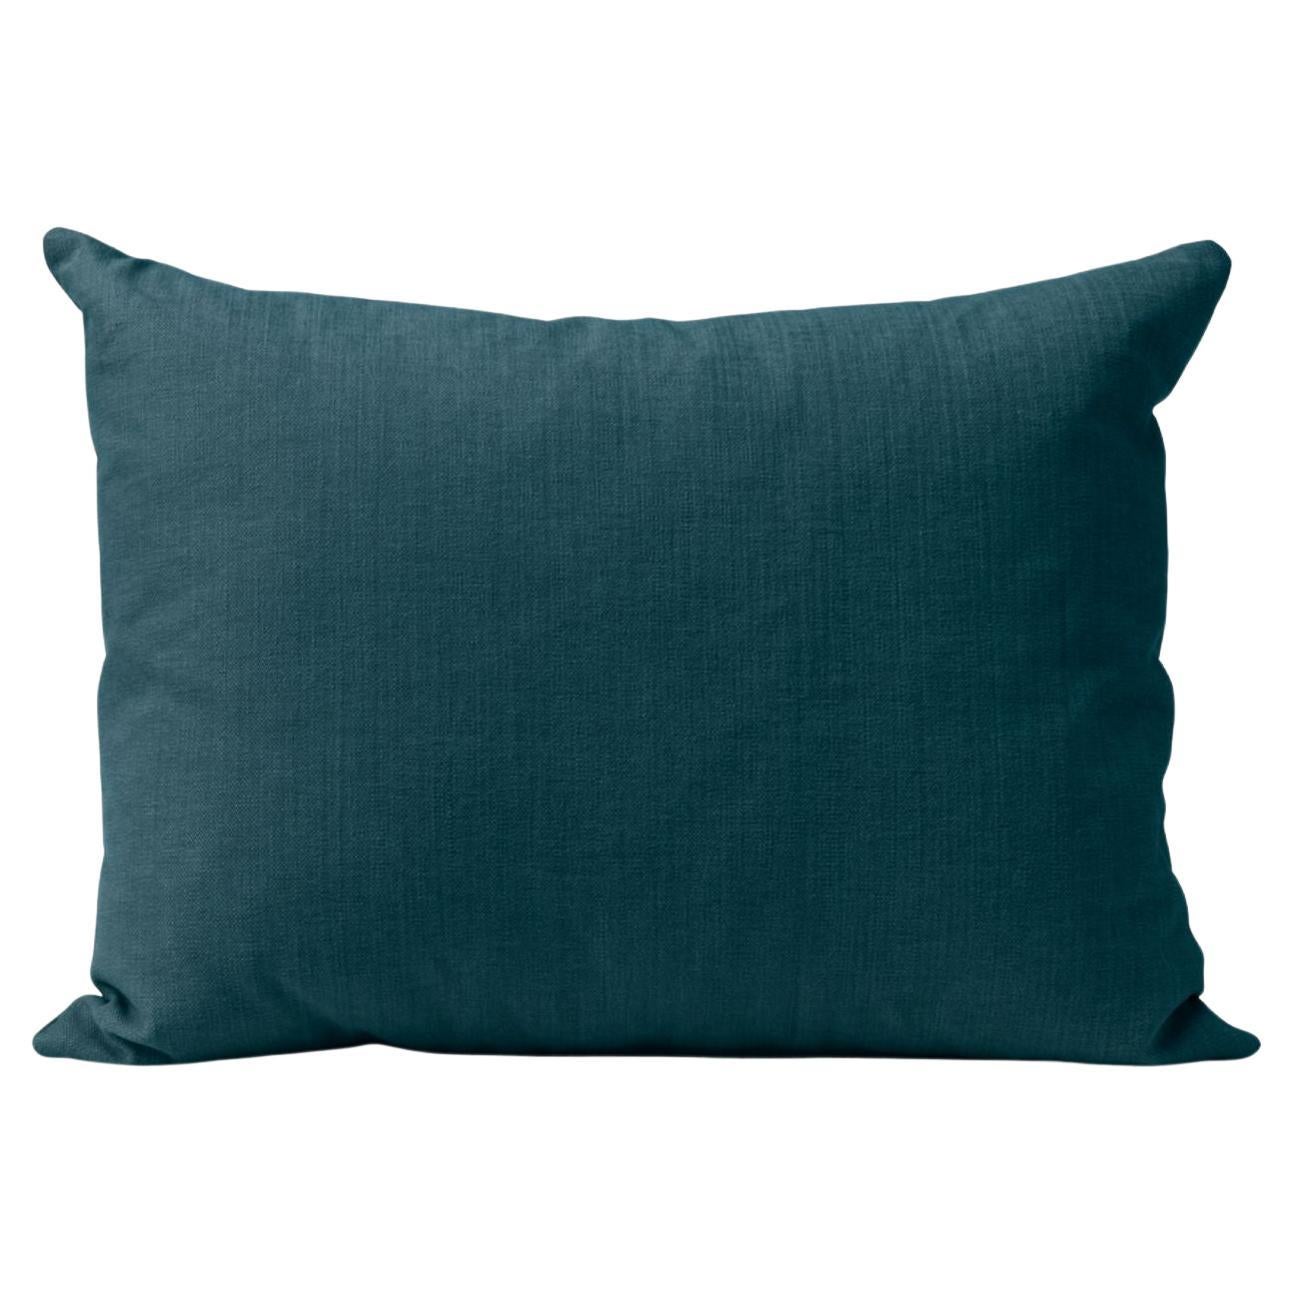 Galore Cushion Square Dark Teal by Warm Nordic For Sale